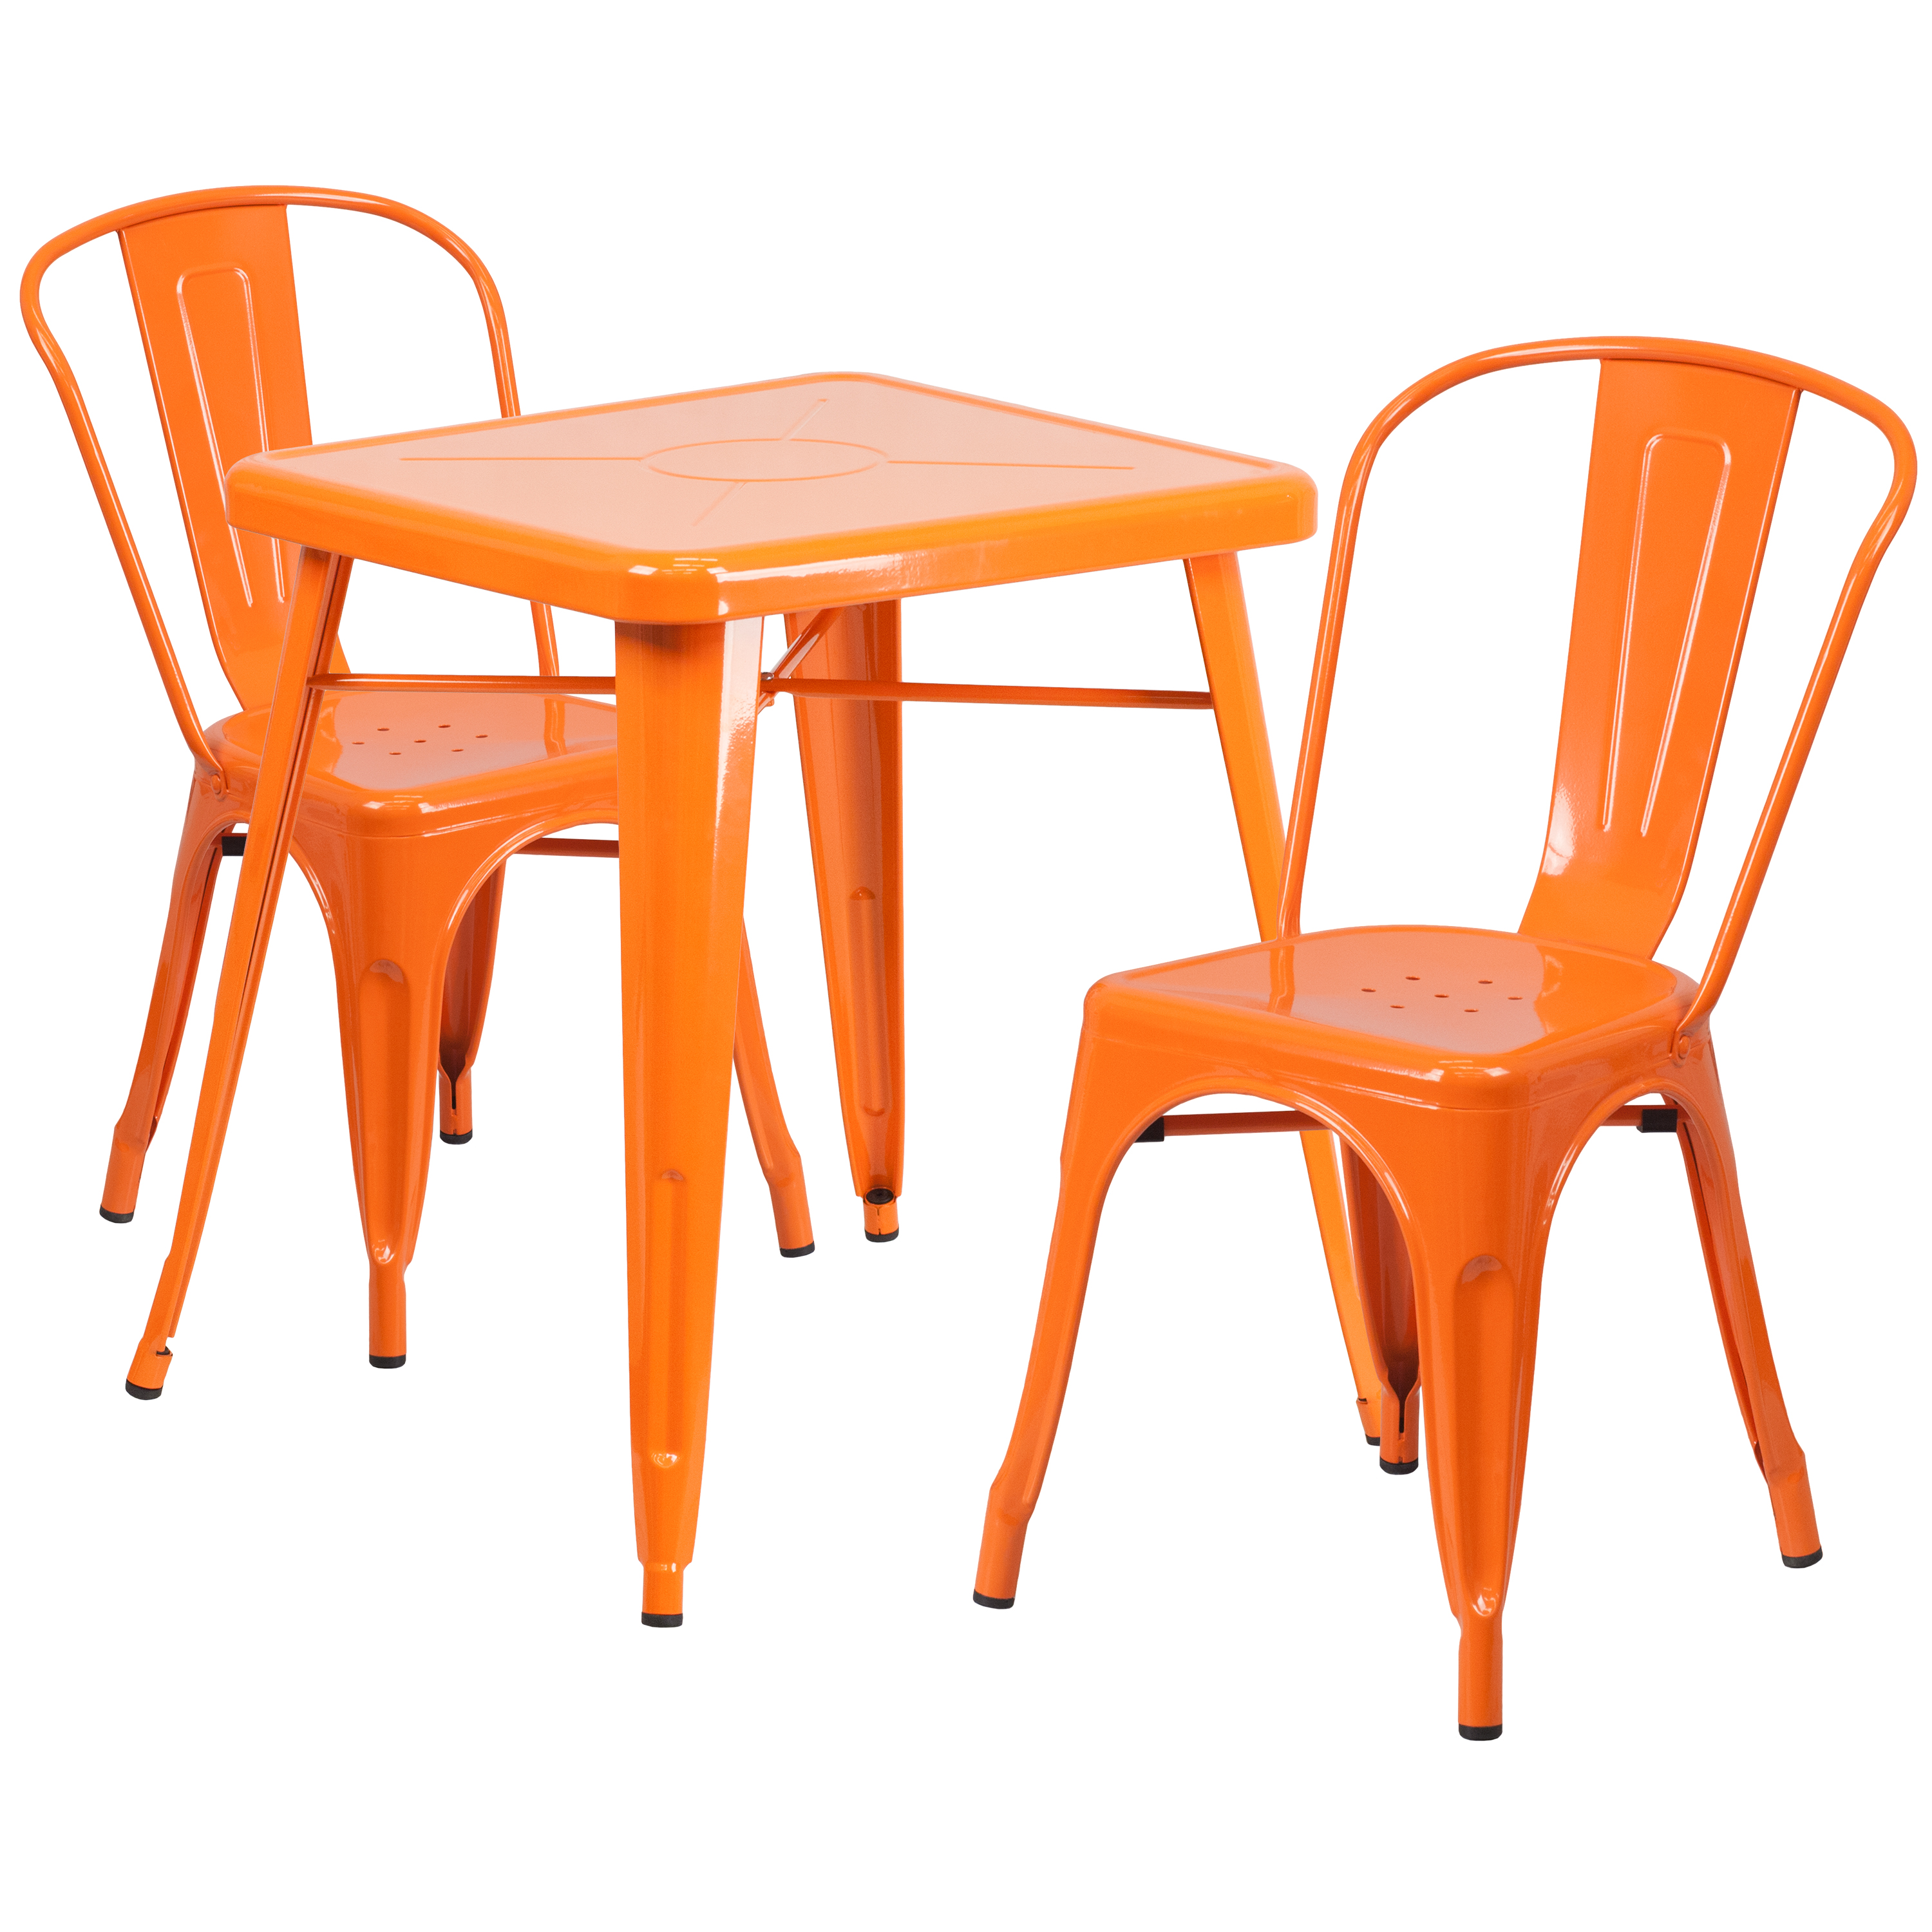 Flash Furniture CH-31330-2-30-OR-GG 23.75" Square Orange Metal Indoor/Outdoor Table Set with 2 Stack Chairs